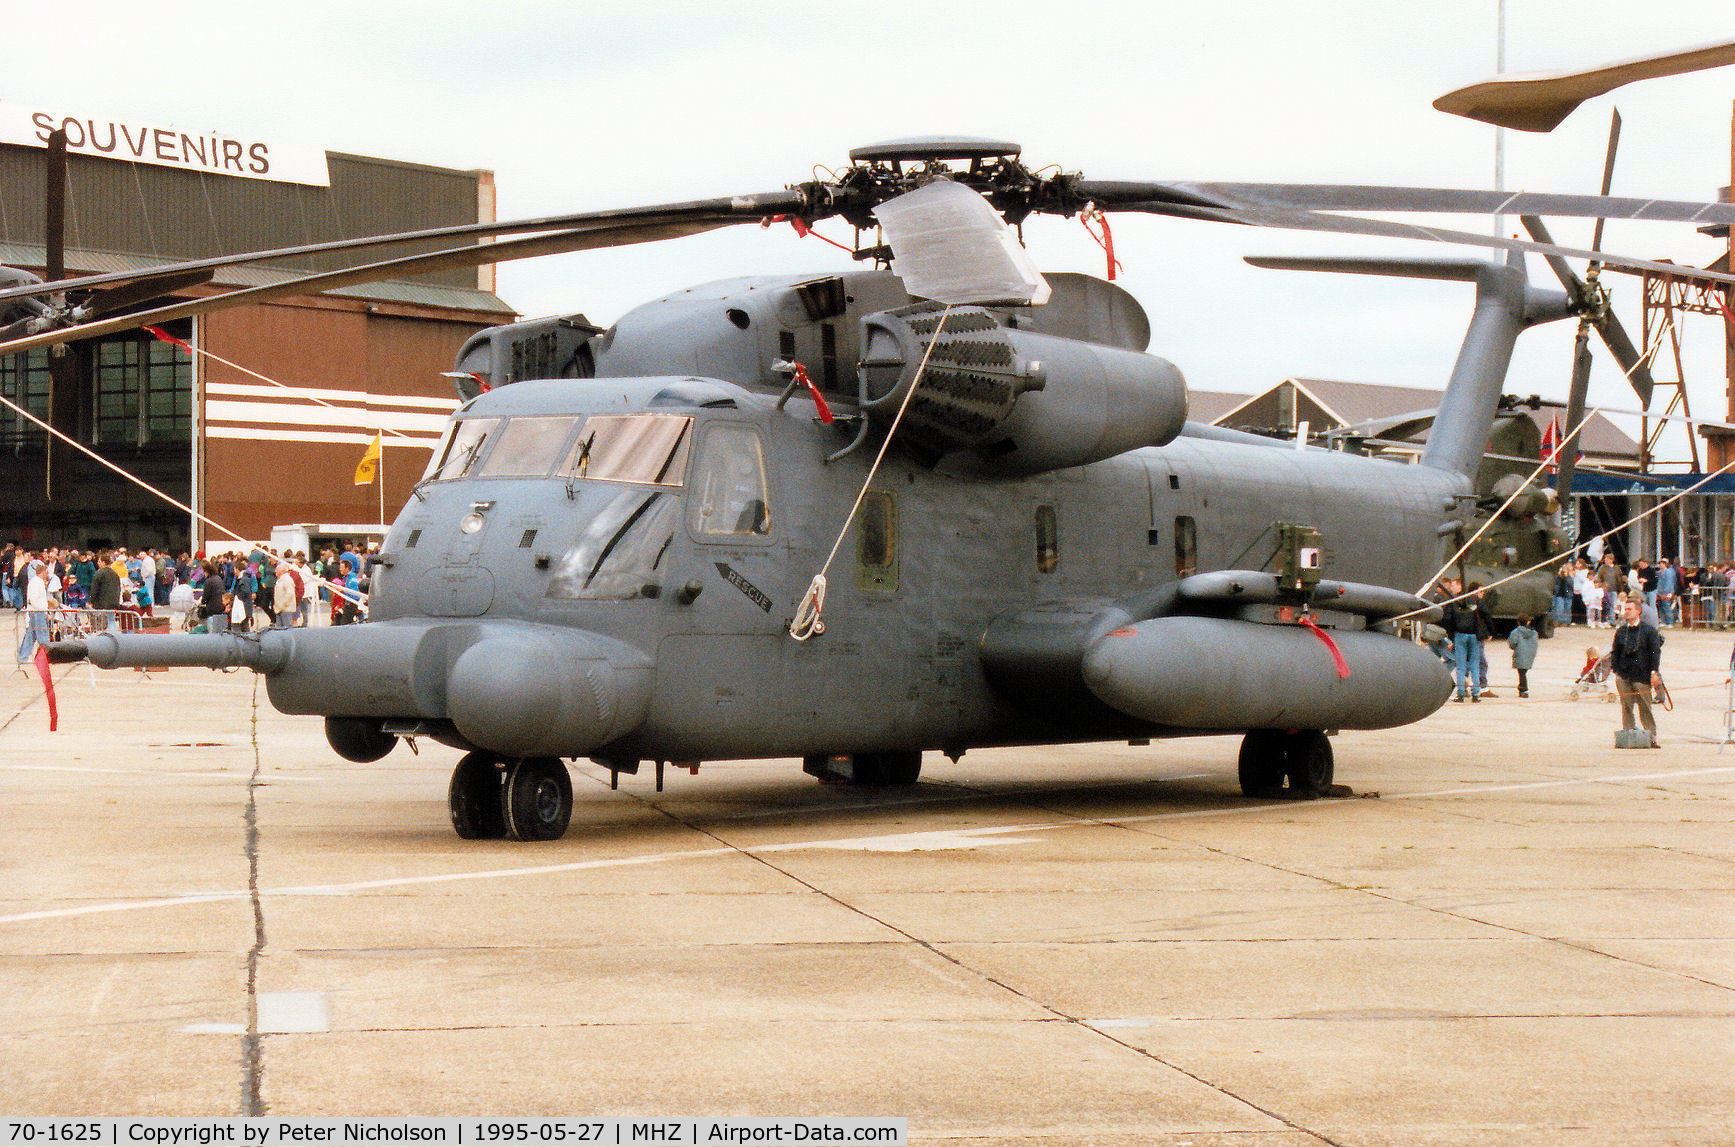 70-1625, 1970 Sikorsky MH-53J Pave Low III C/N 65-335, Pave Low III of 21st Special Operations Squadron on display at the 1995 RAF Mildenhall Air Fete.